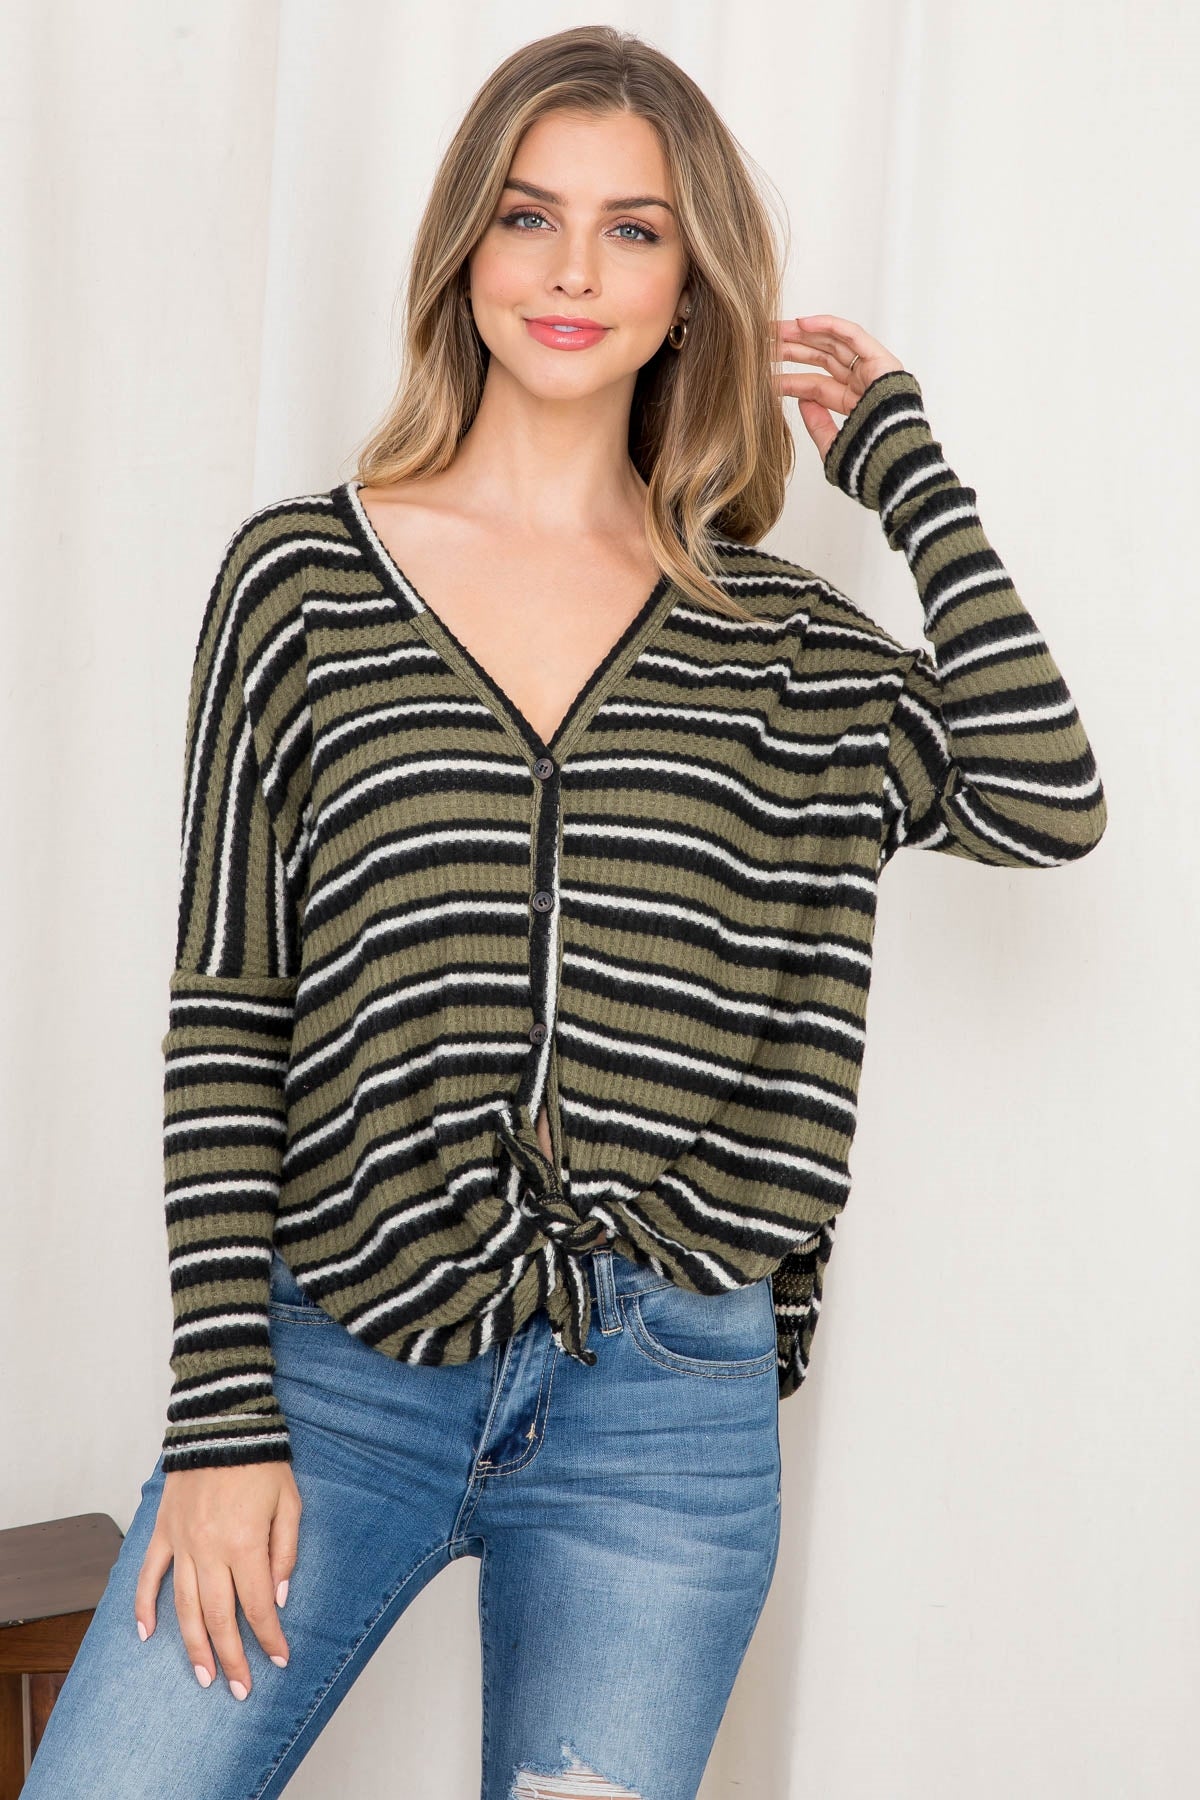 OLIVE BLACK STRIPES TOP (NOW $3.00 ONLY!)